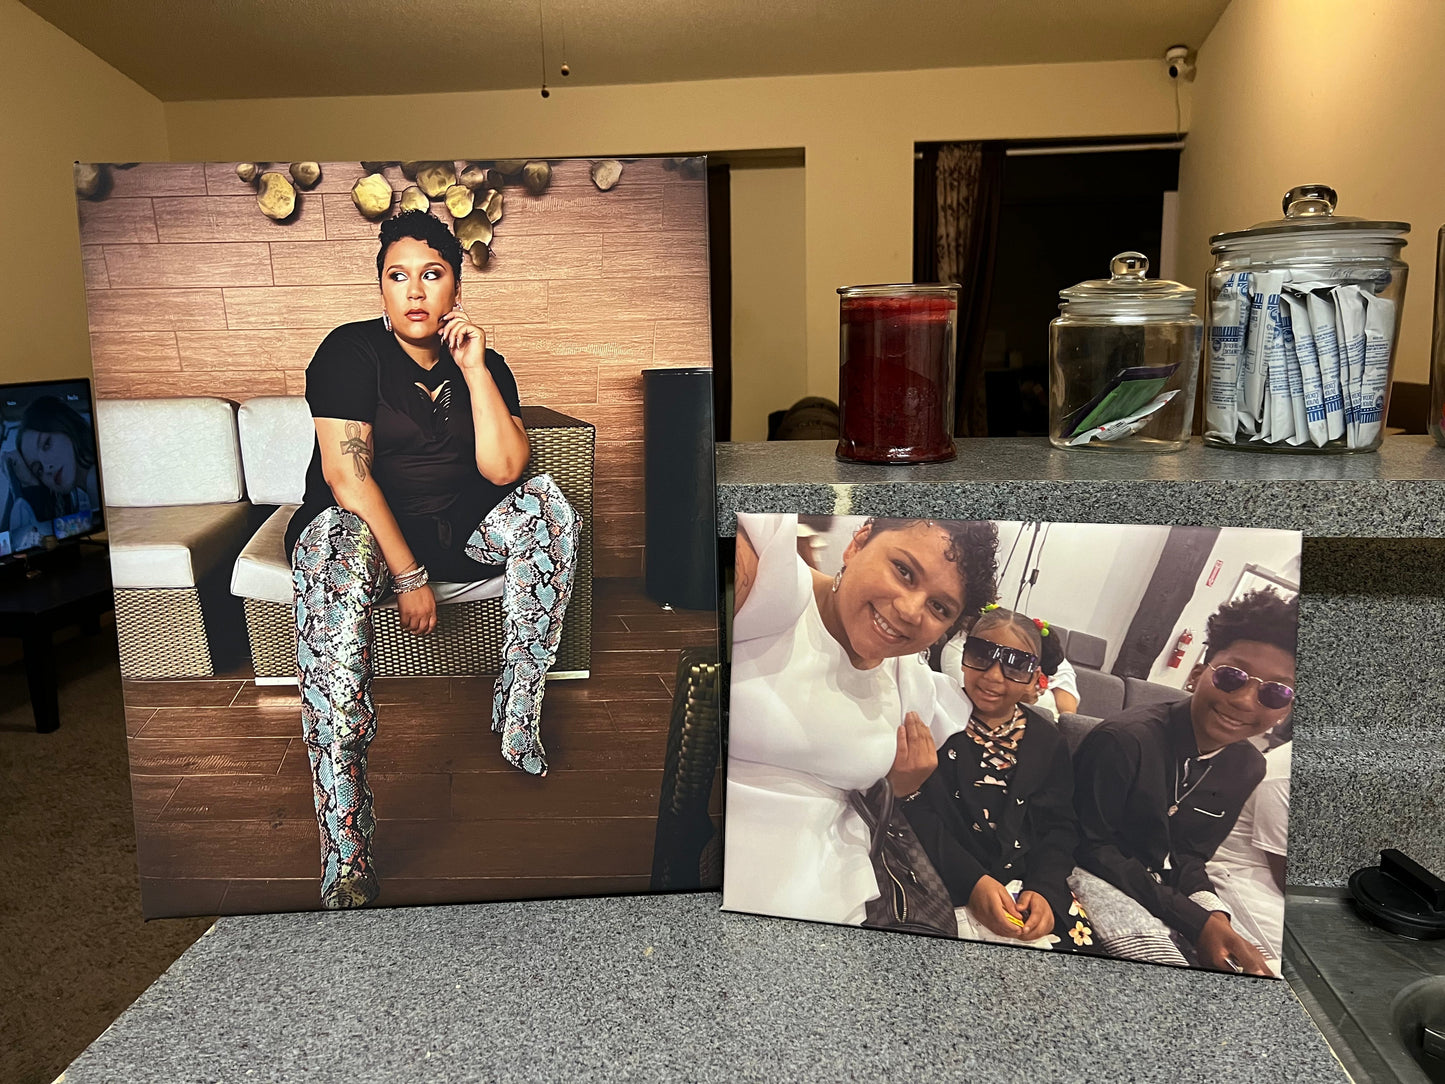 Custom Printed Canvases 16X20  PROMO